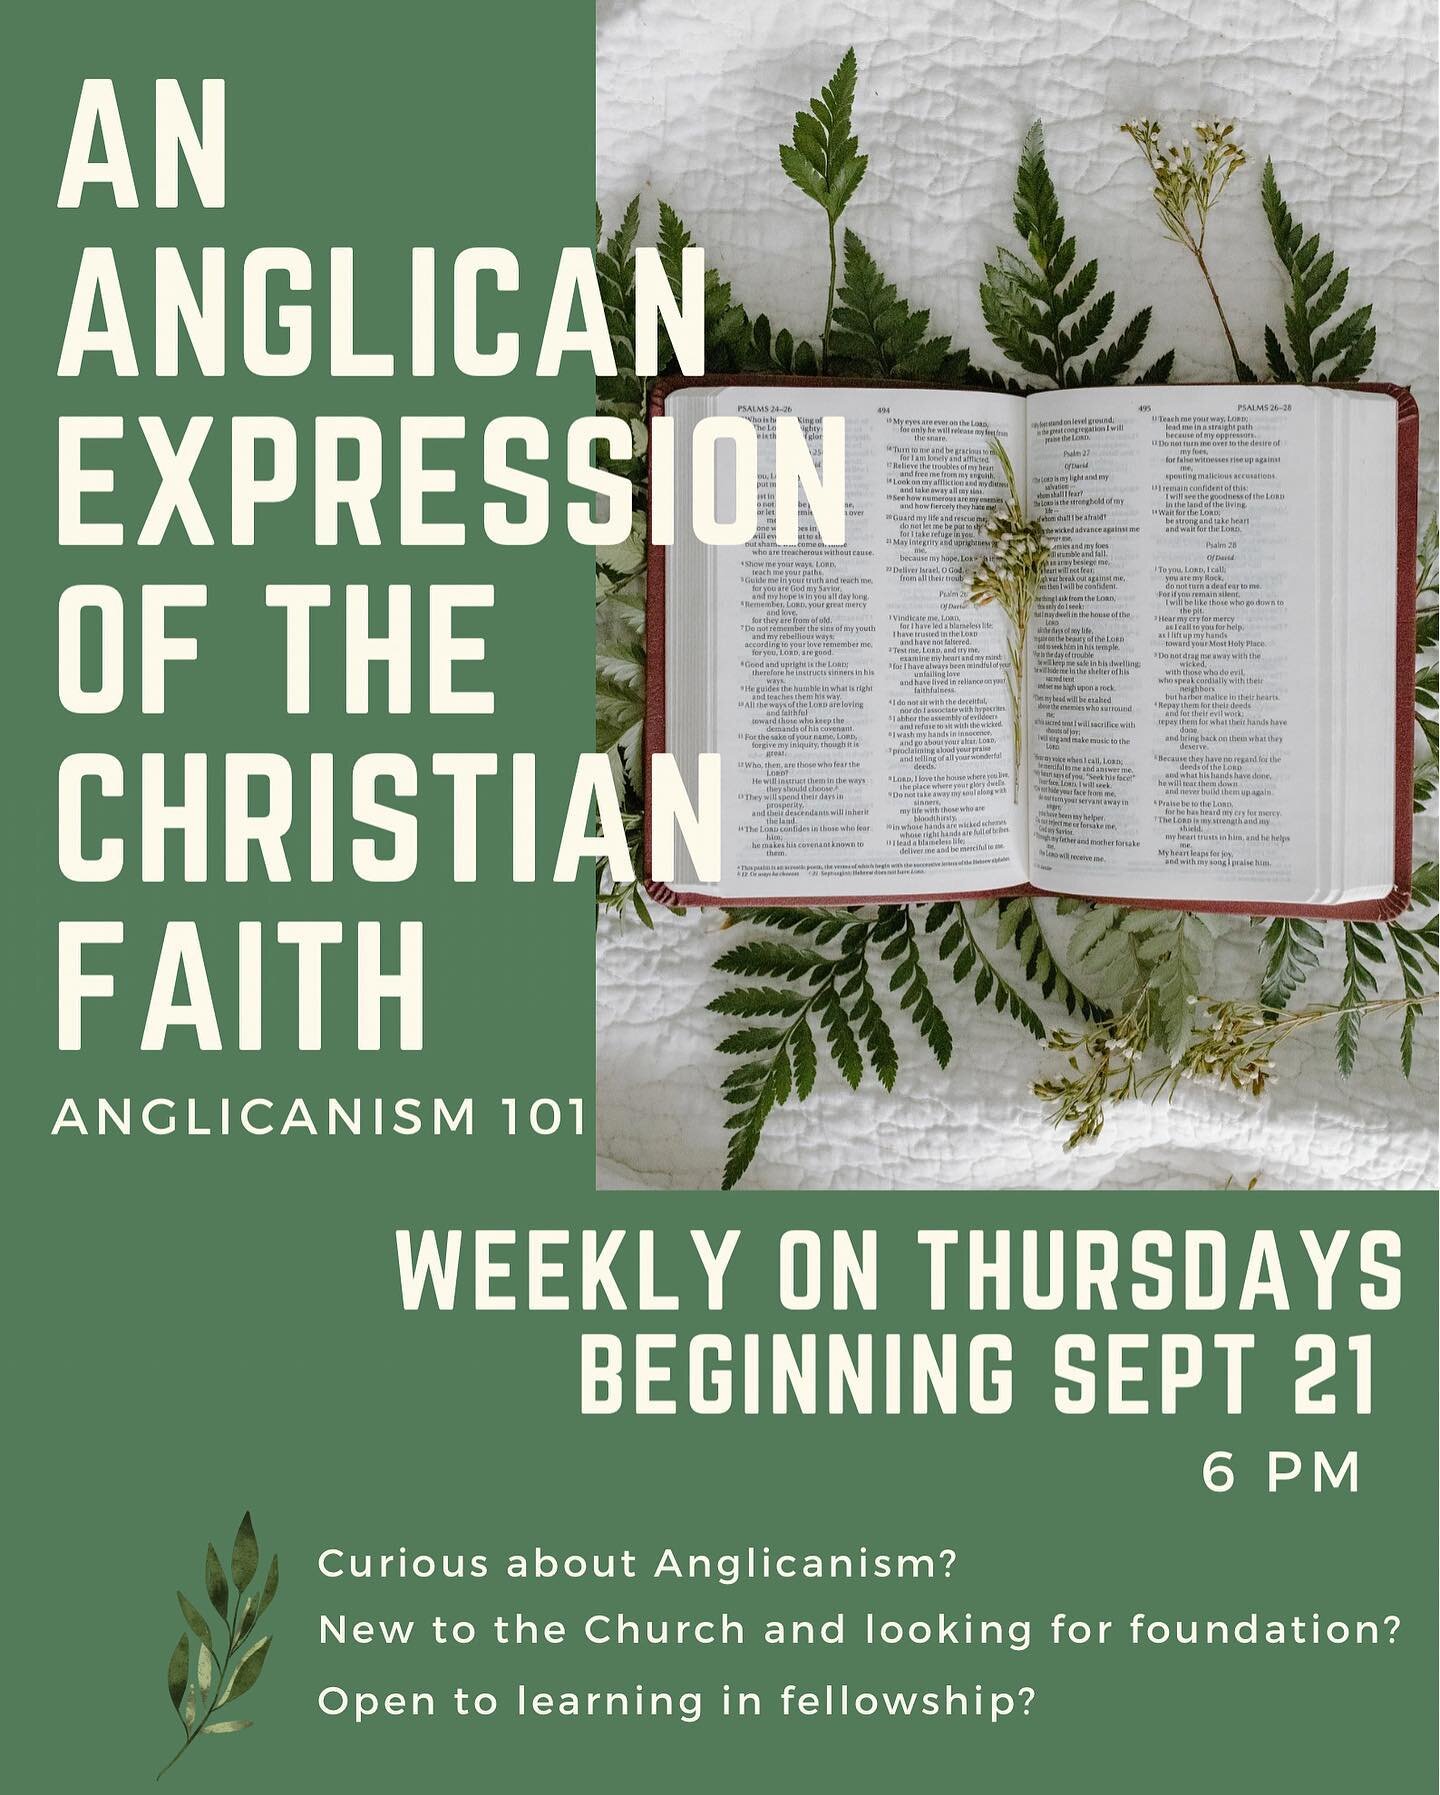 Our courses are still going strong! If you&rsquo;re at all interested in exploring Anglicanism, there is a wonderful group at St George&rsquo;s dedicated to learning in fellowship. 

All are welcome, soup provided.

#worship #anglicanchurch #mosaicof